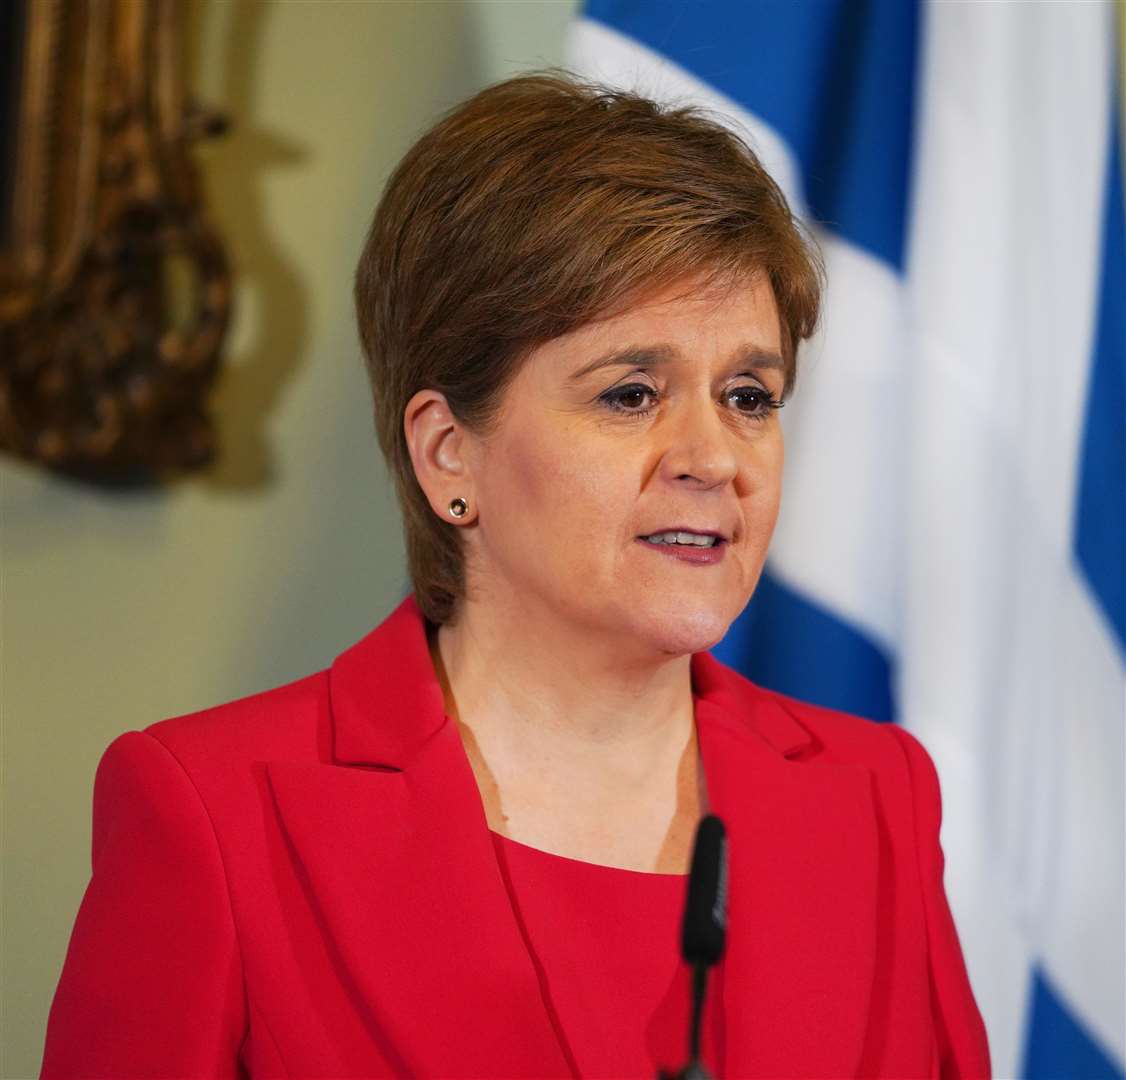 Nicola Sturgeon announcing her resignation at her press conference on Wednesday morning